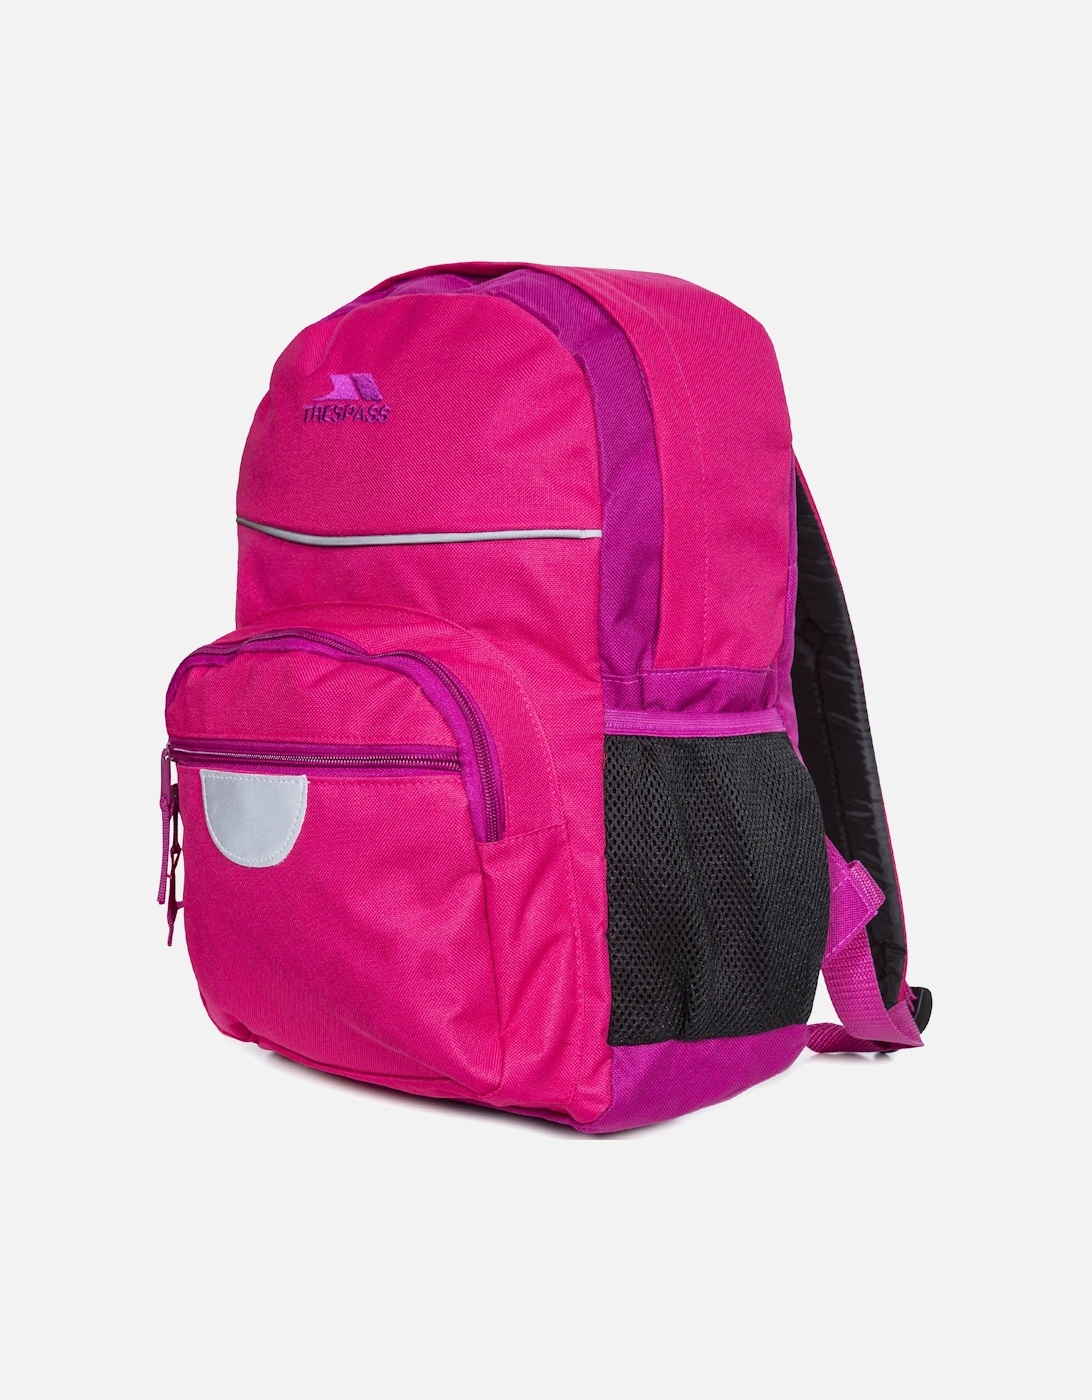 Kids Swagger 16L Backpack